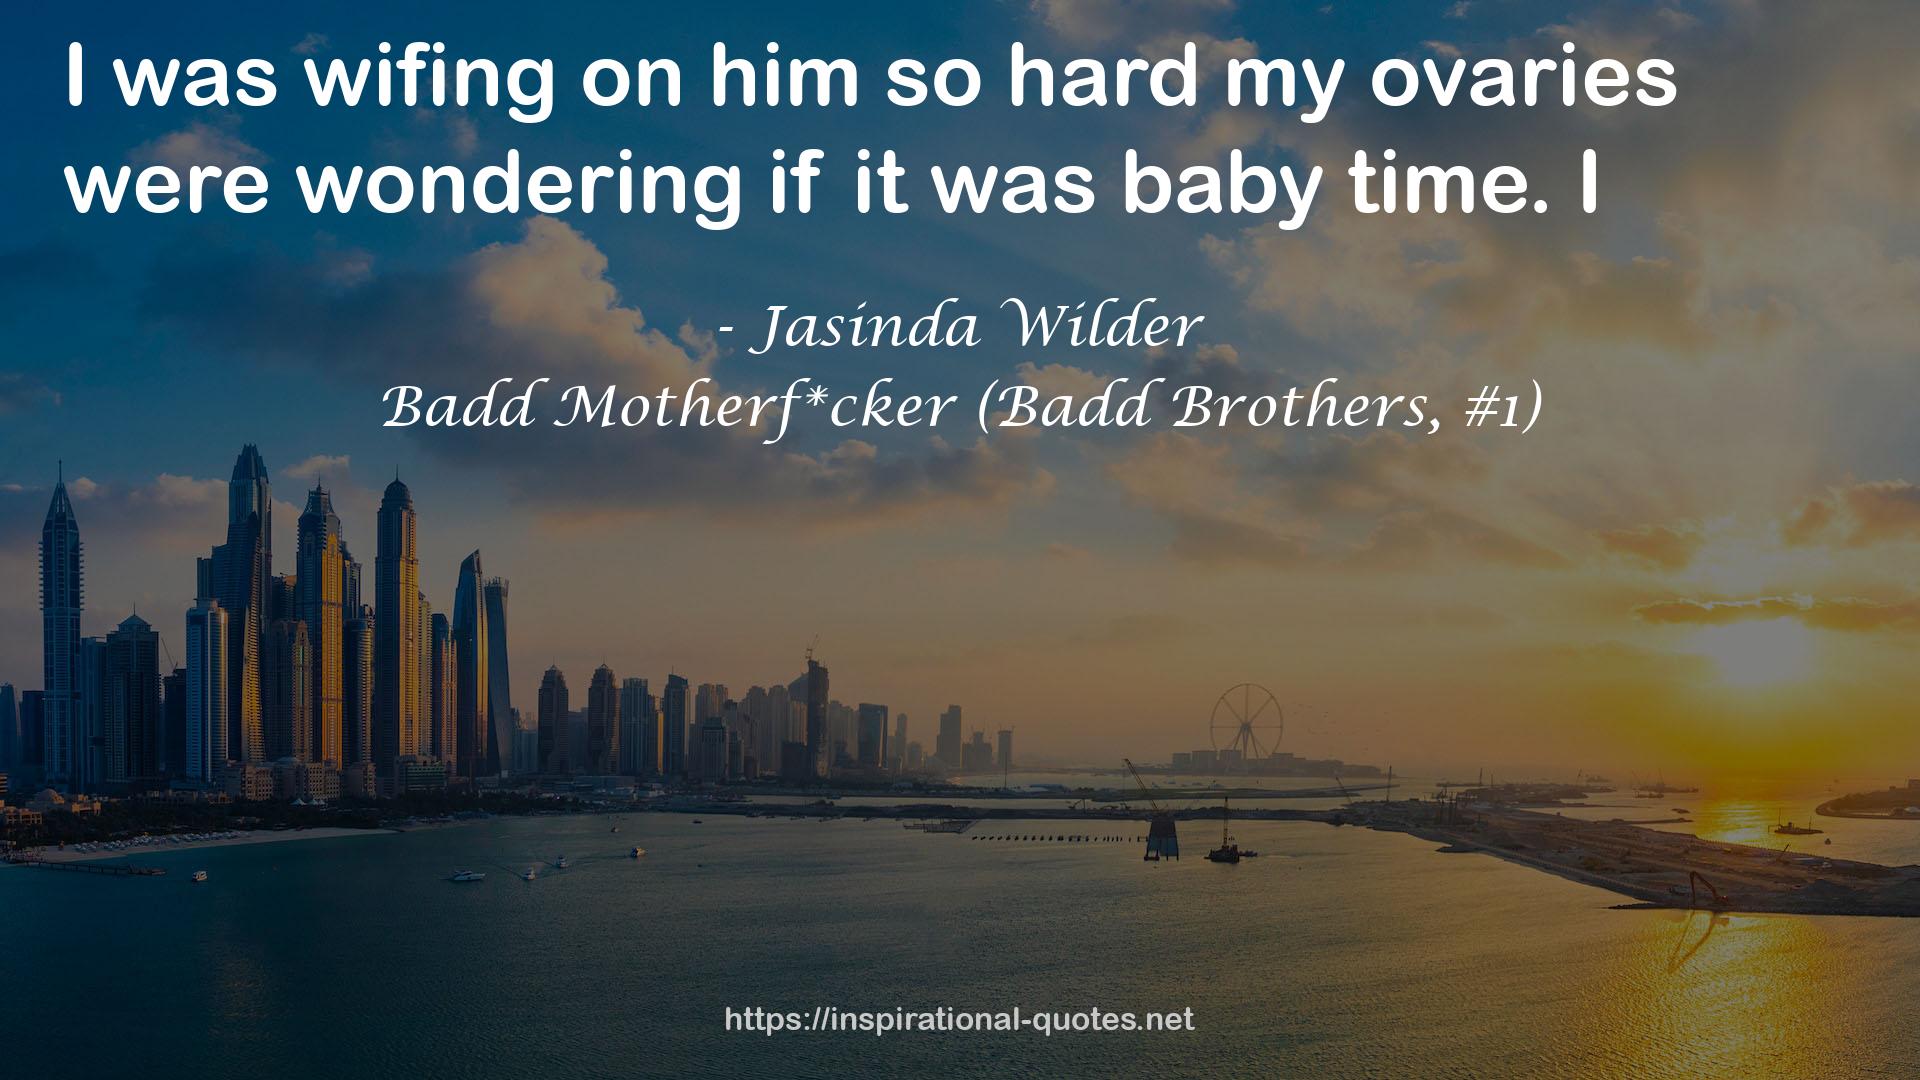 Badd Motherf*cker (Badd Brothers, #1) QUOTES